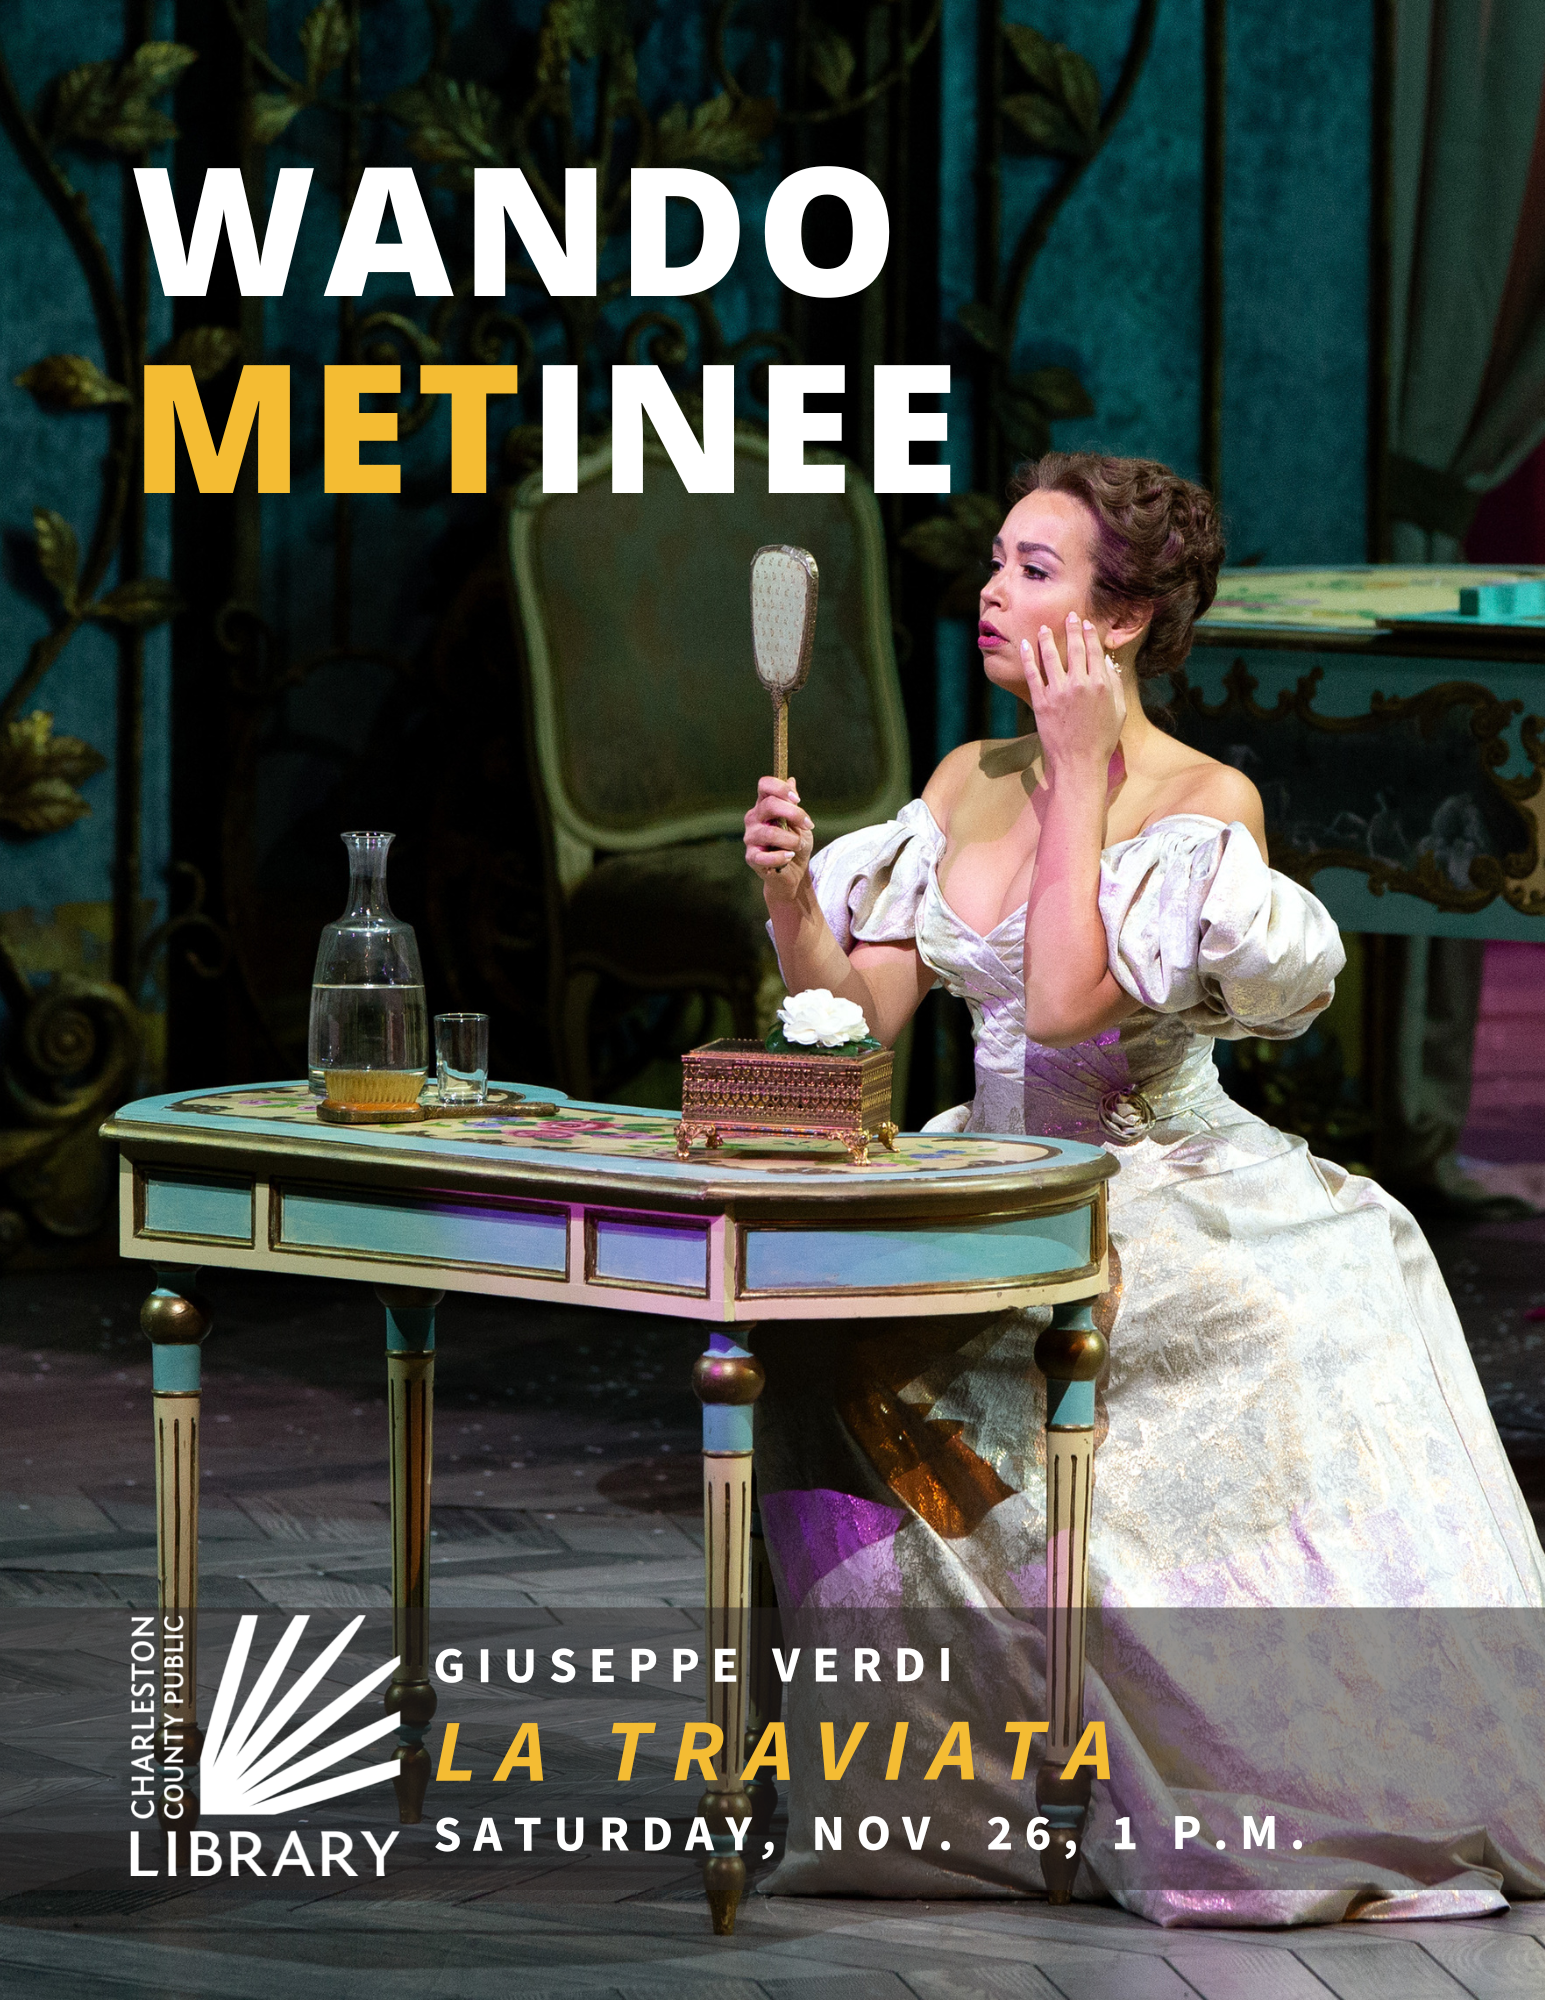 Nadine Sierra in costume as Violetta in the Met Opera's production of La Traviata. The CCPL logo in white appears over the image, and white text reads 